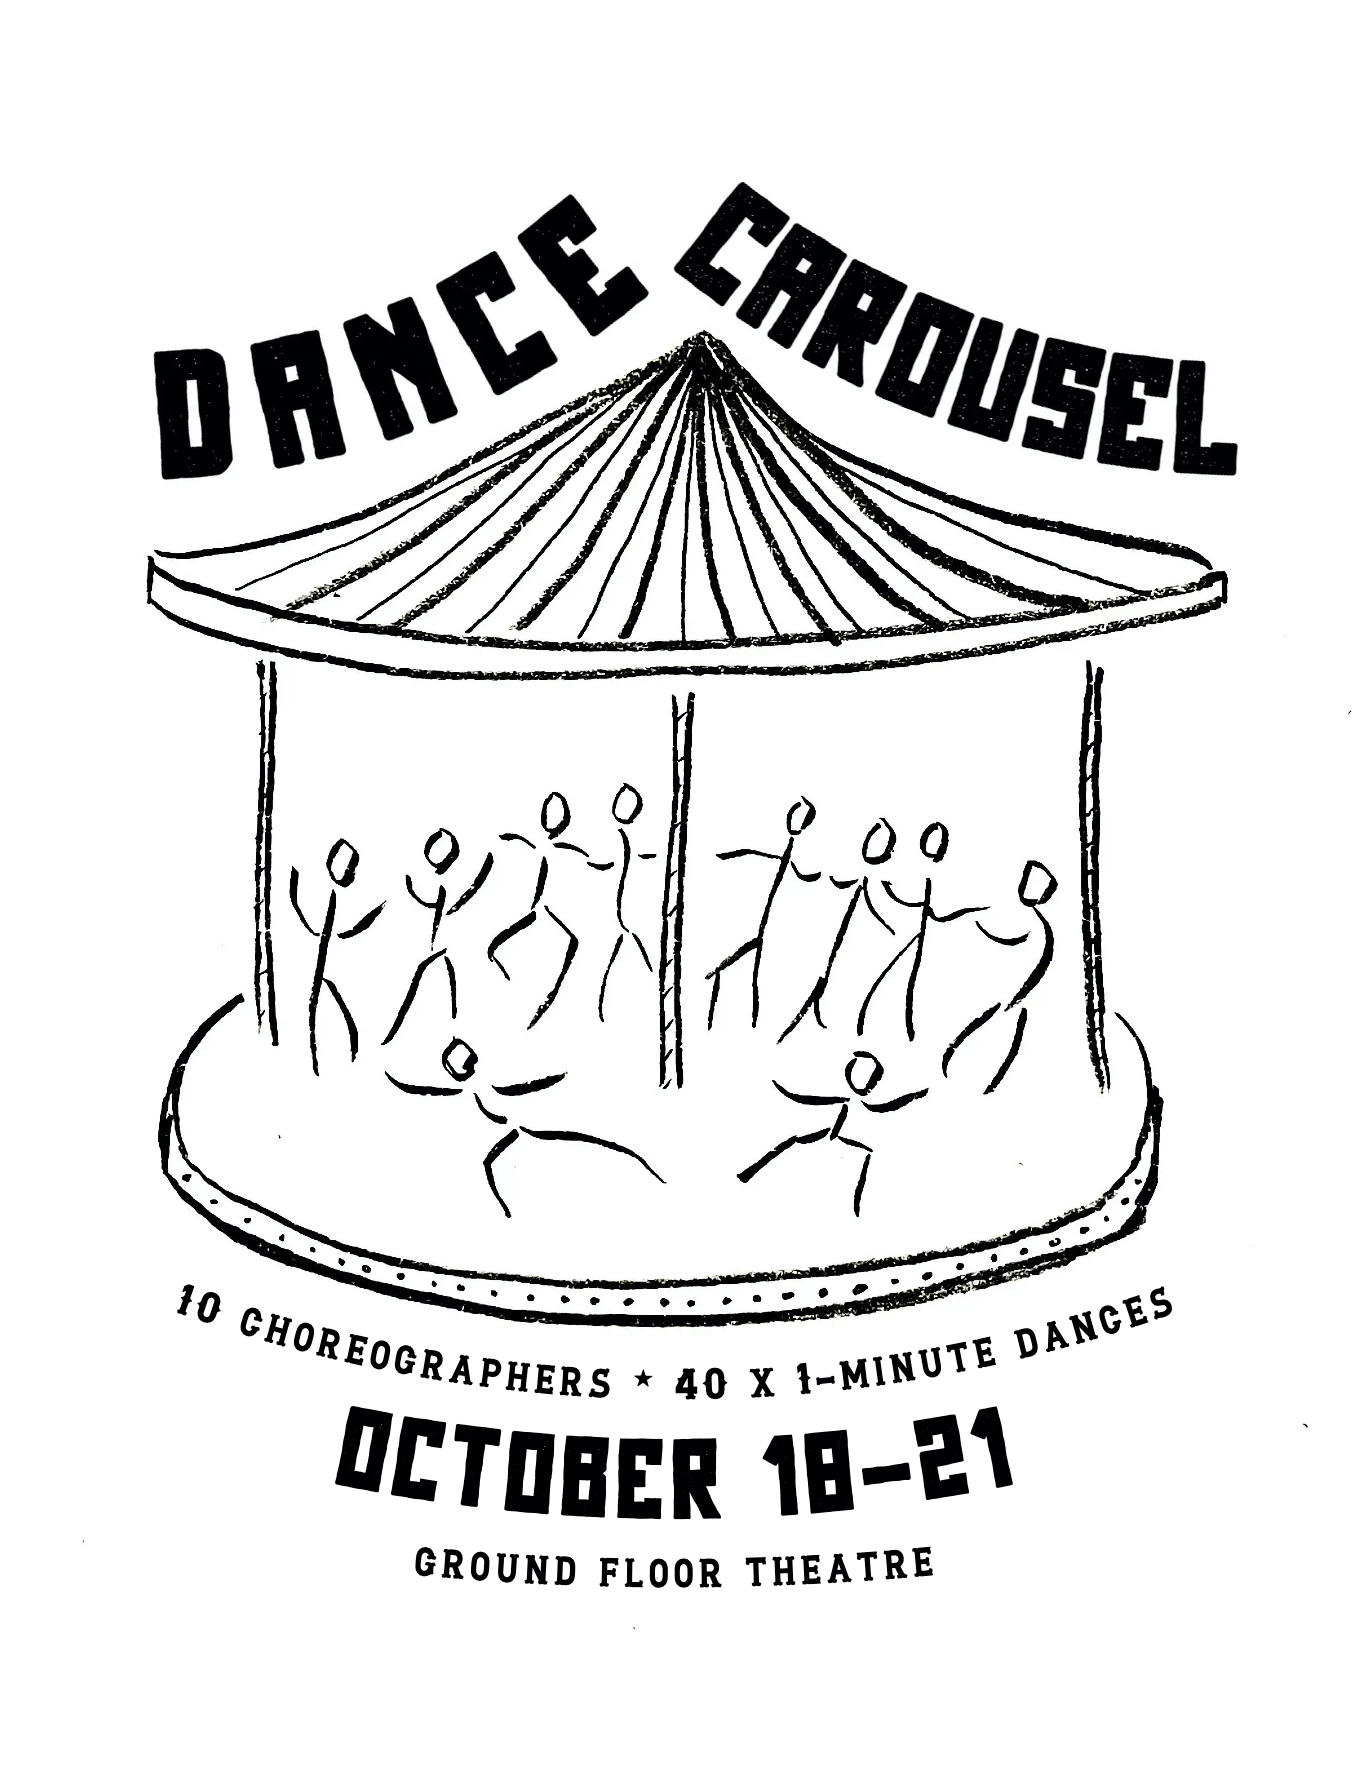 Dance Carousel by Austin Independent Choreographers